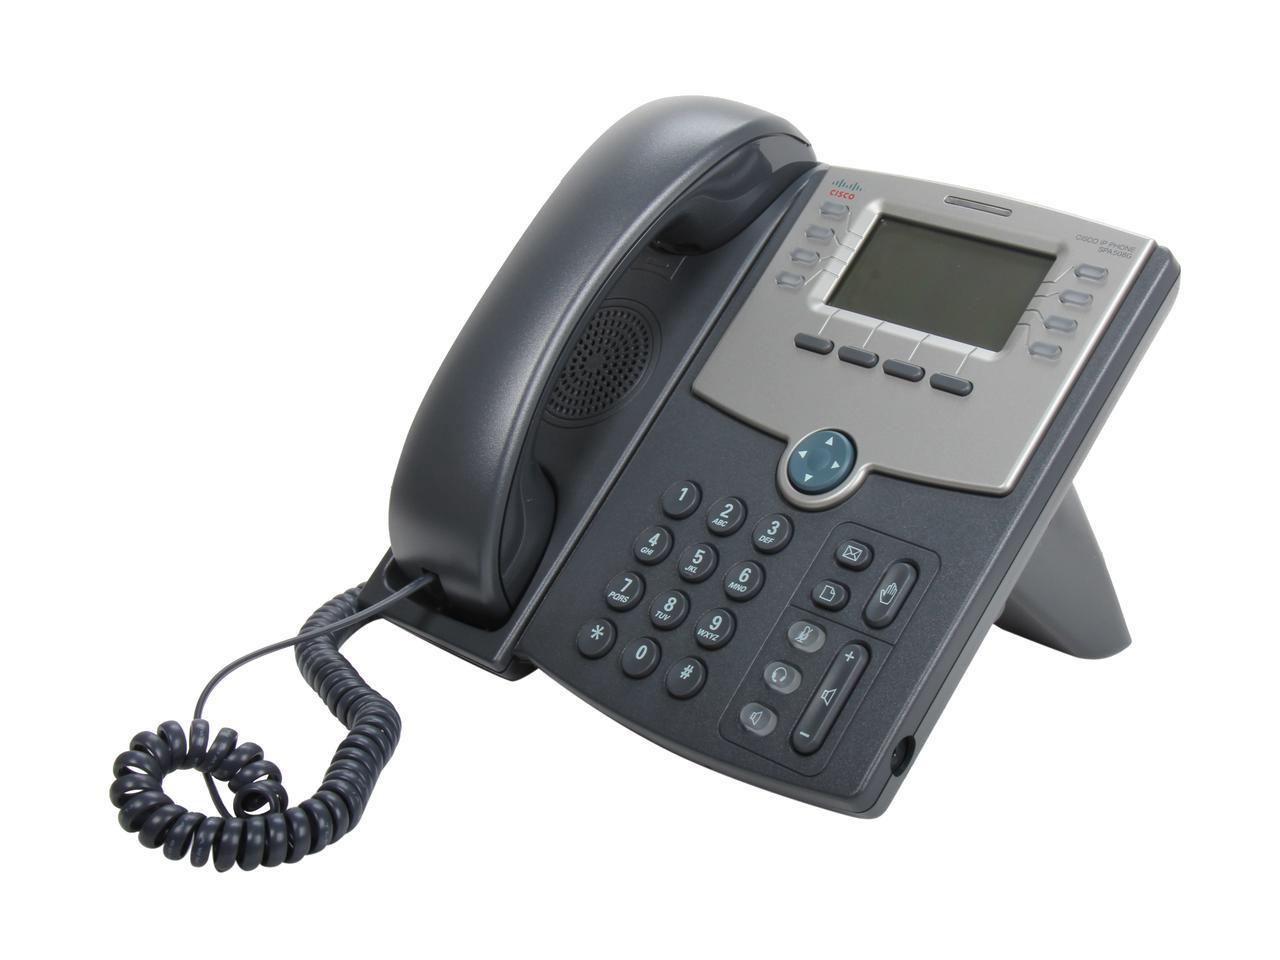  Cisco Small Business SPA508G 8 Line IP Phone With Display, PoE and PC Port